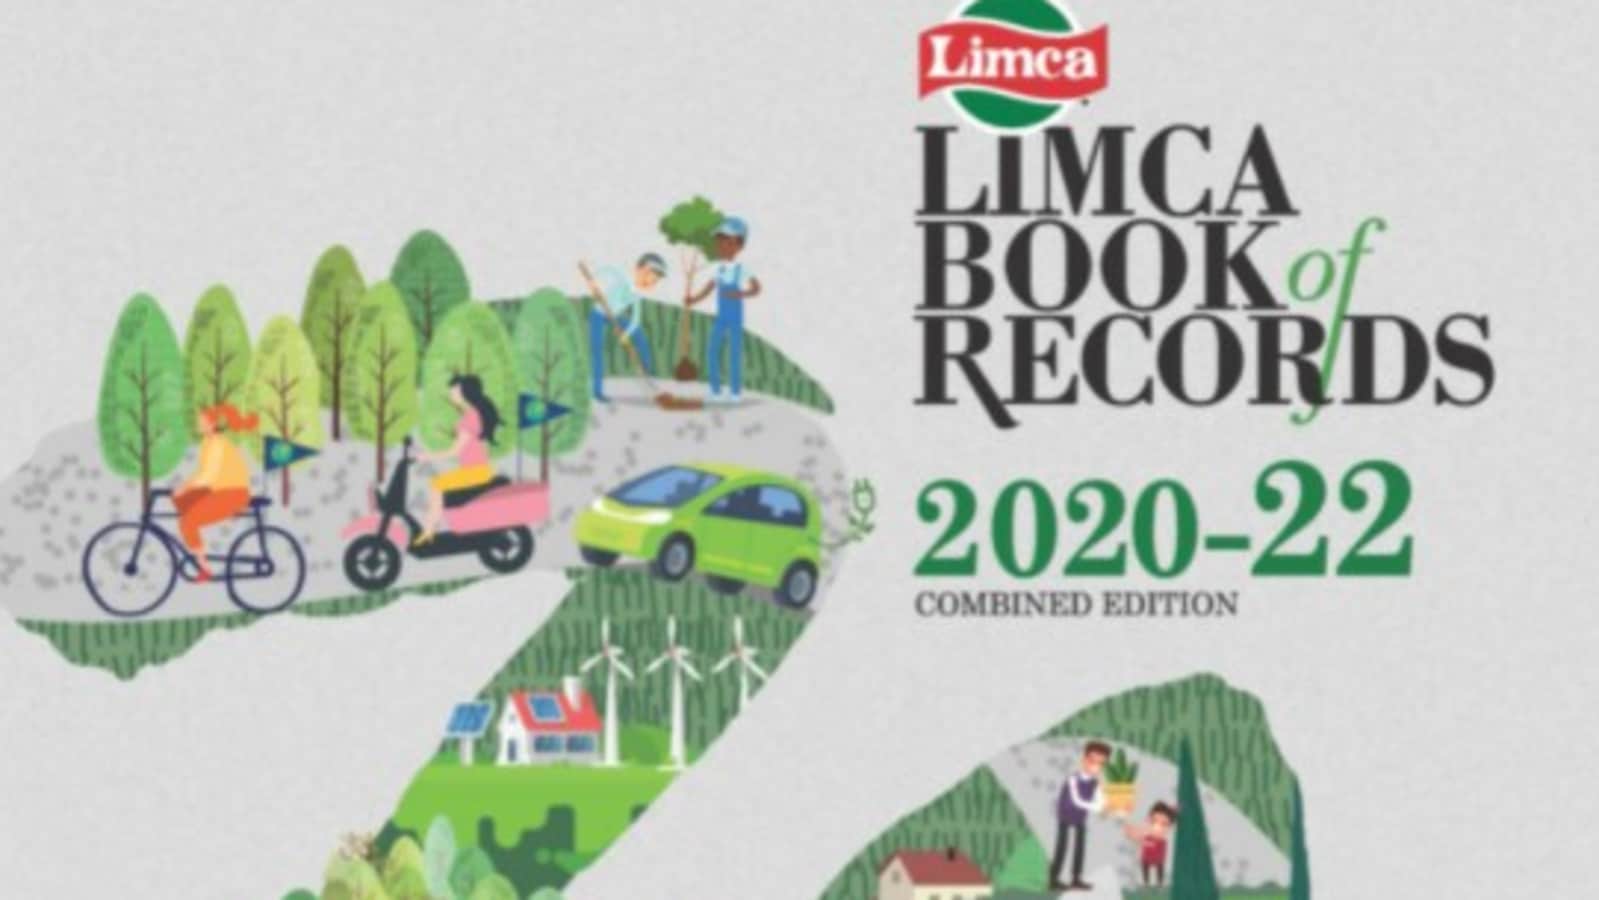 In special edition, Limca Book of Records honours frontline Covid19